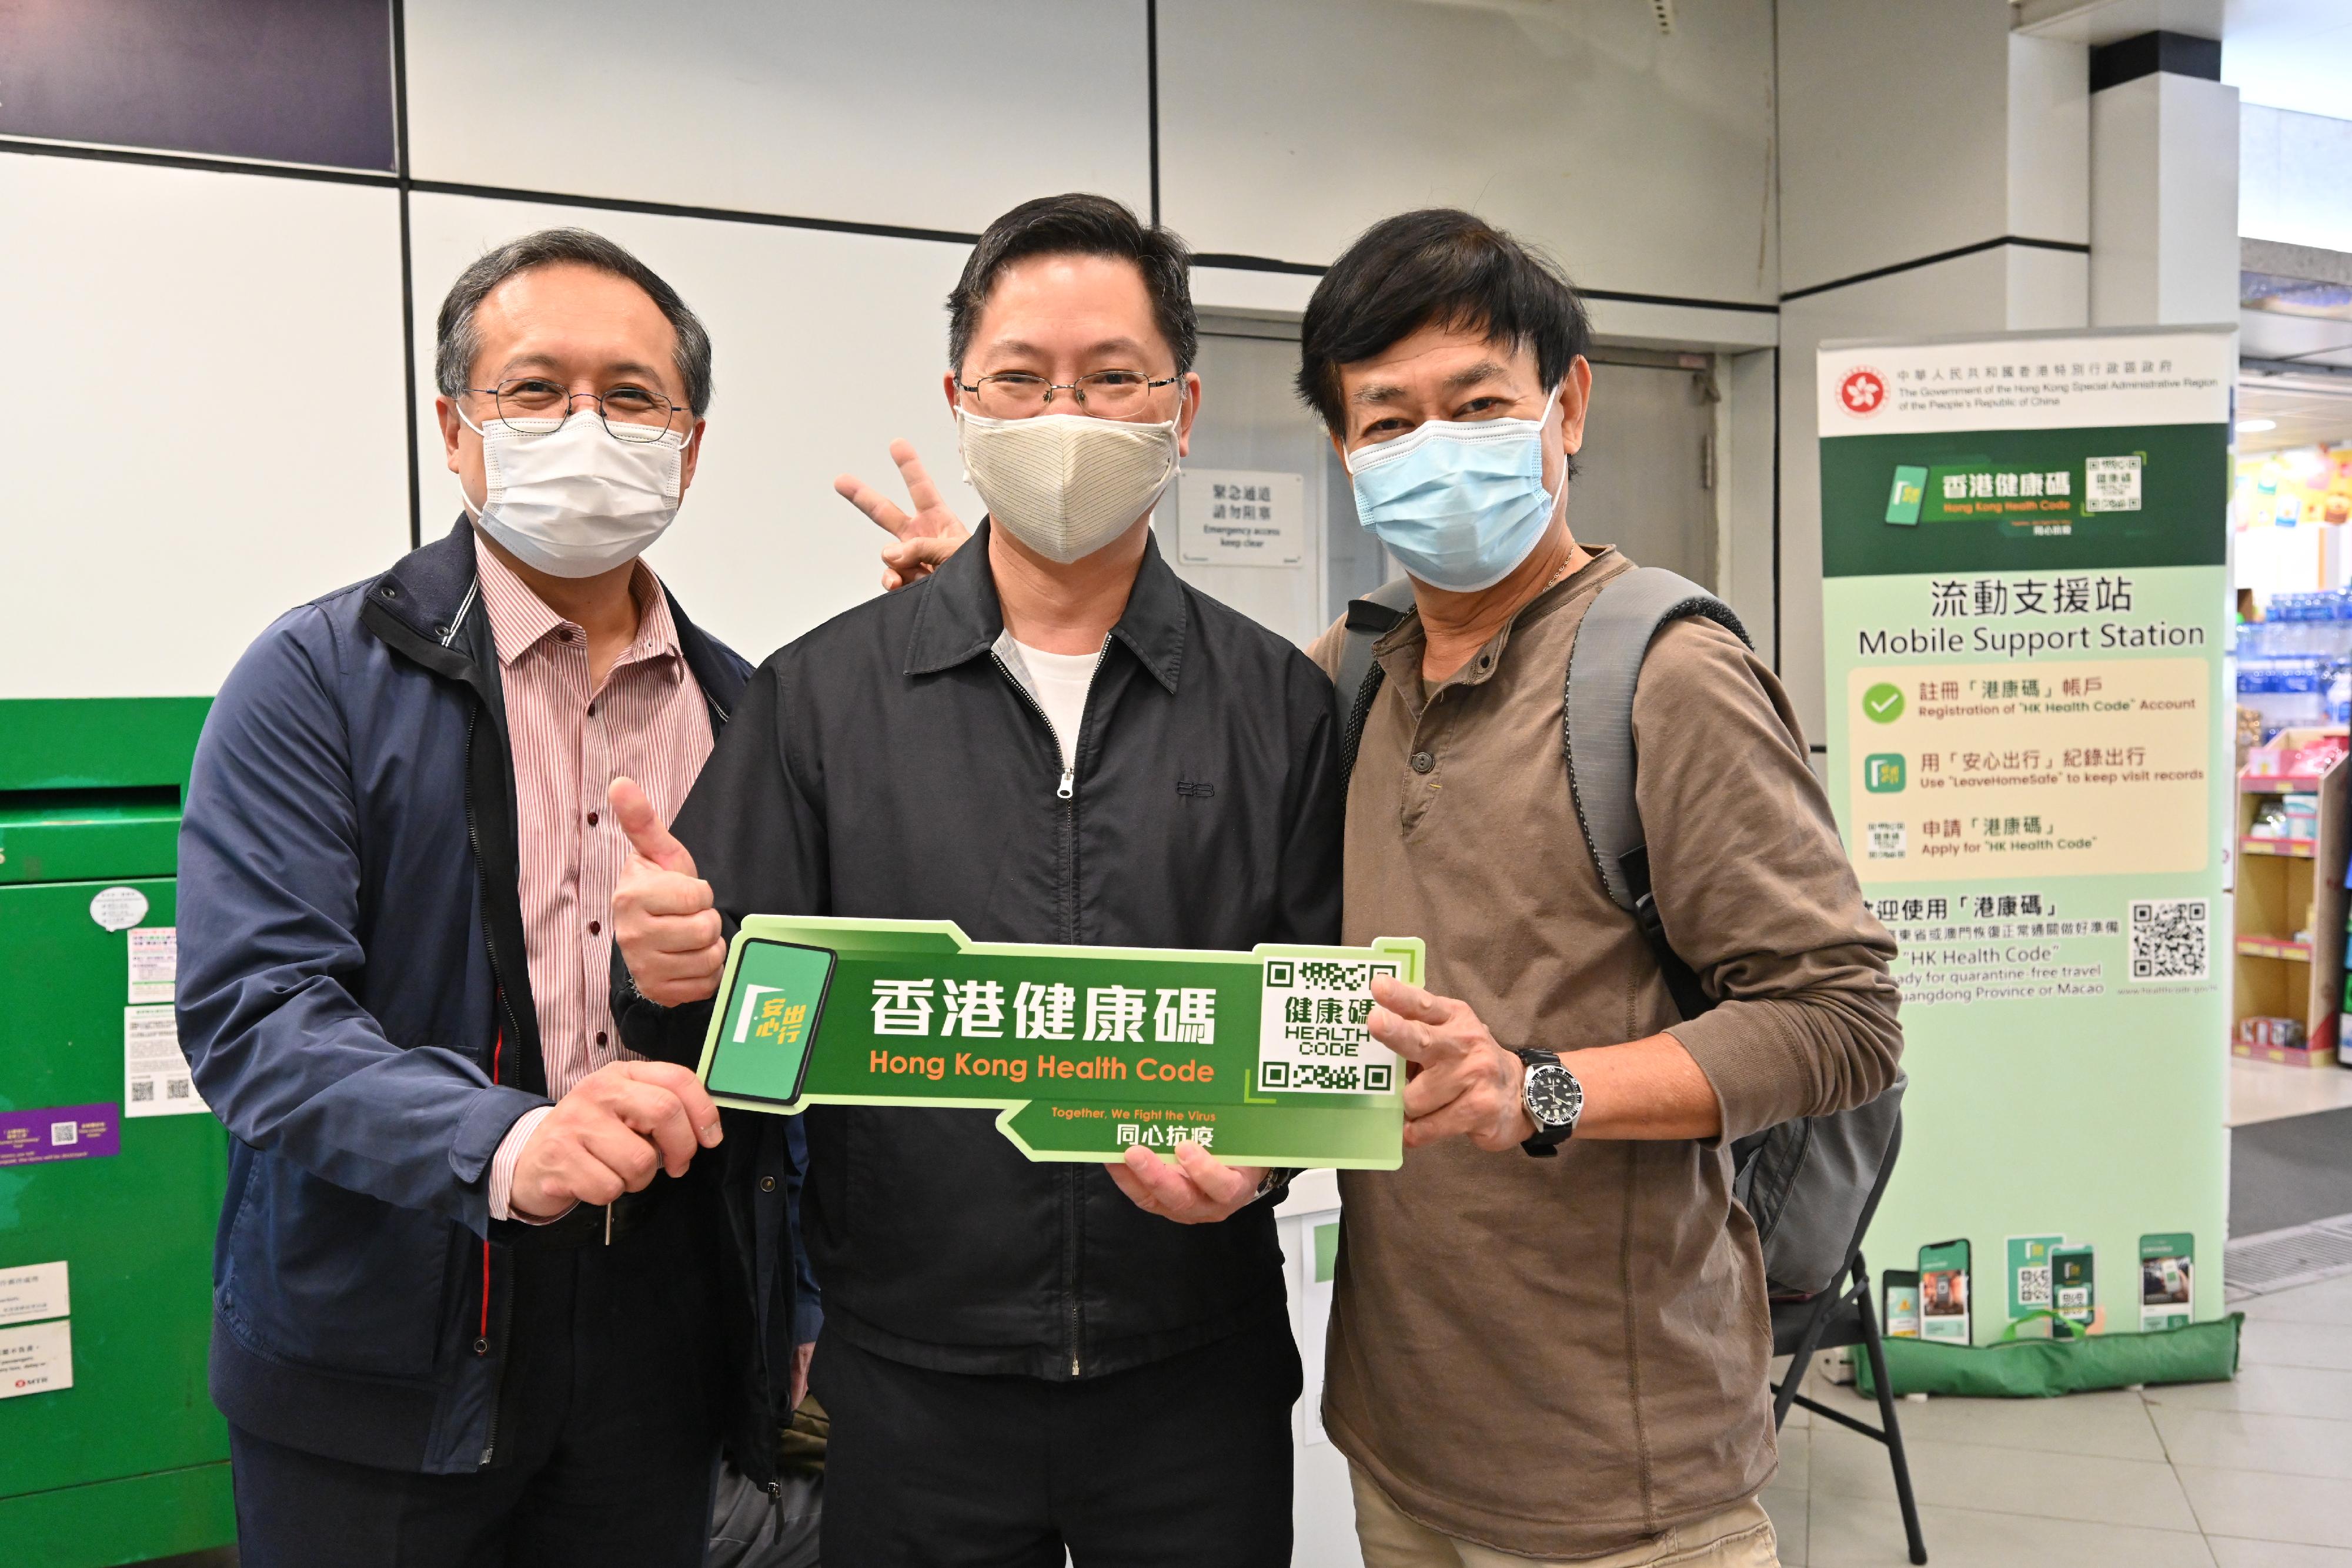 The Secretary for Innovation and Technology, Mr Alfred Sit (centre), today (December 25) views the operation of the Hong Kong Health Code mobile support station at Tai Po Market MTR Station and is pictured with a member of the public. Next to Mr Sit is the Assistant Government Chief Information Officer (Industry Development), Mr Kingsley Wong (left).
